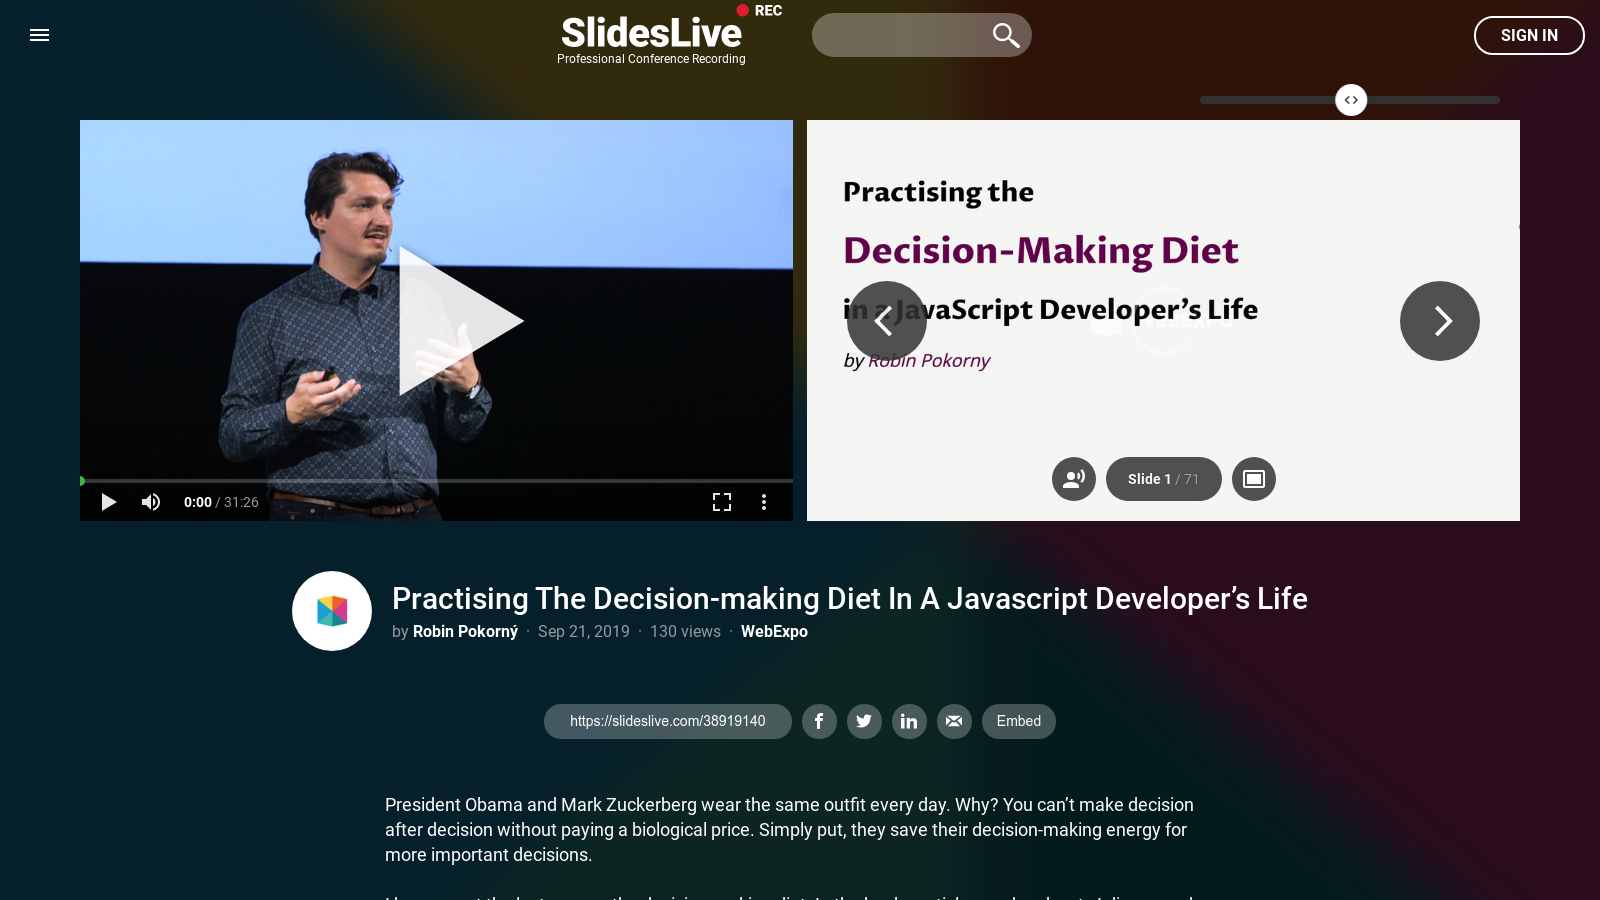 Practising the Decision-Making Diet in a JavaScript Developer’s Life